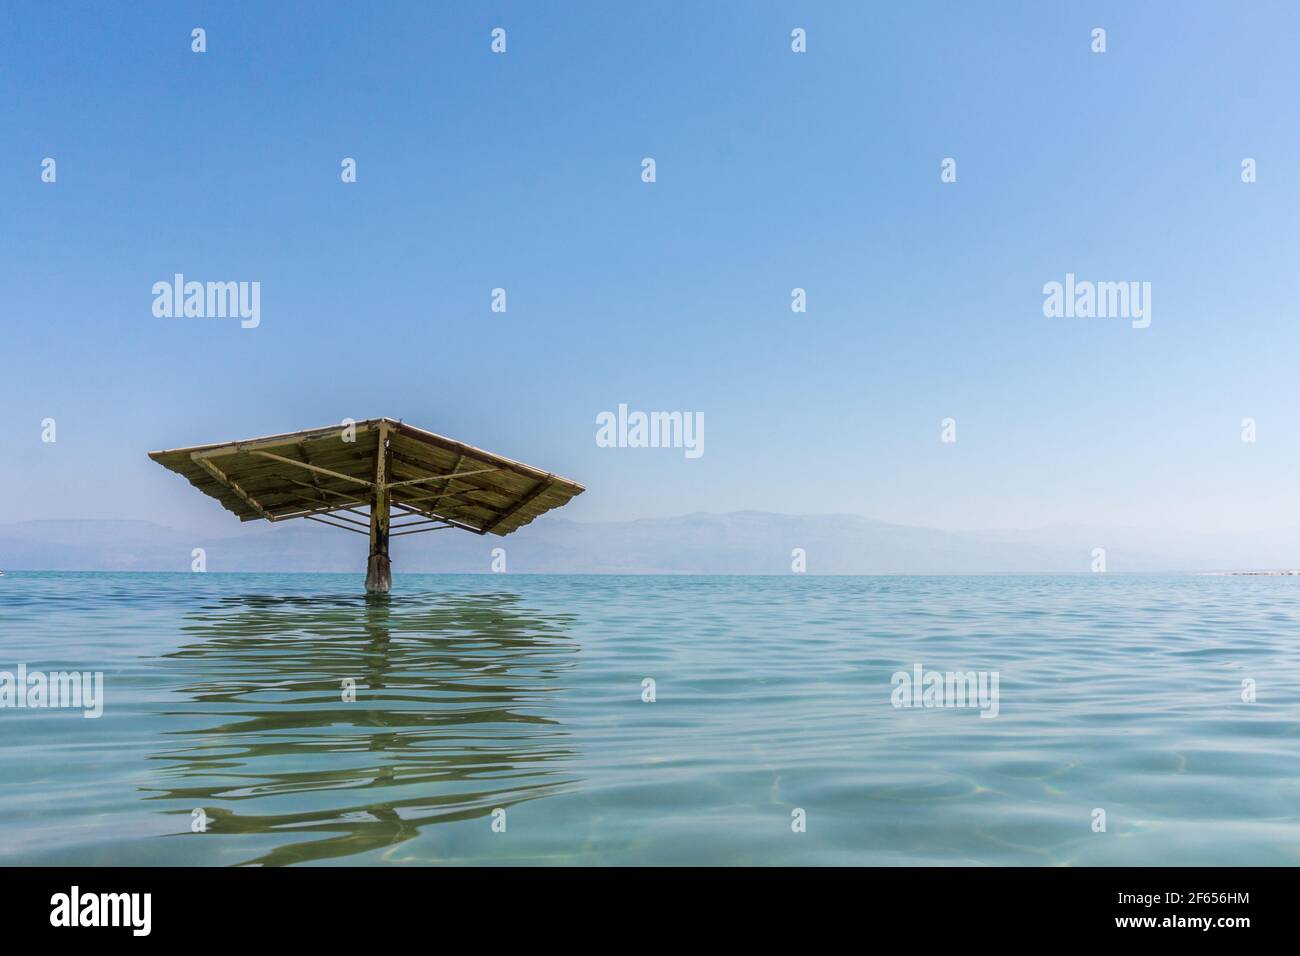 Sunshade to protect from the sun in the water of the Dead sea on a beautiful Sunny day. Stock Photo